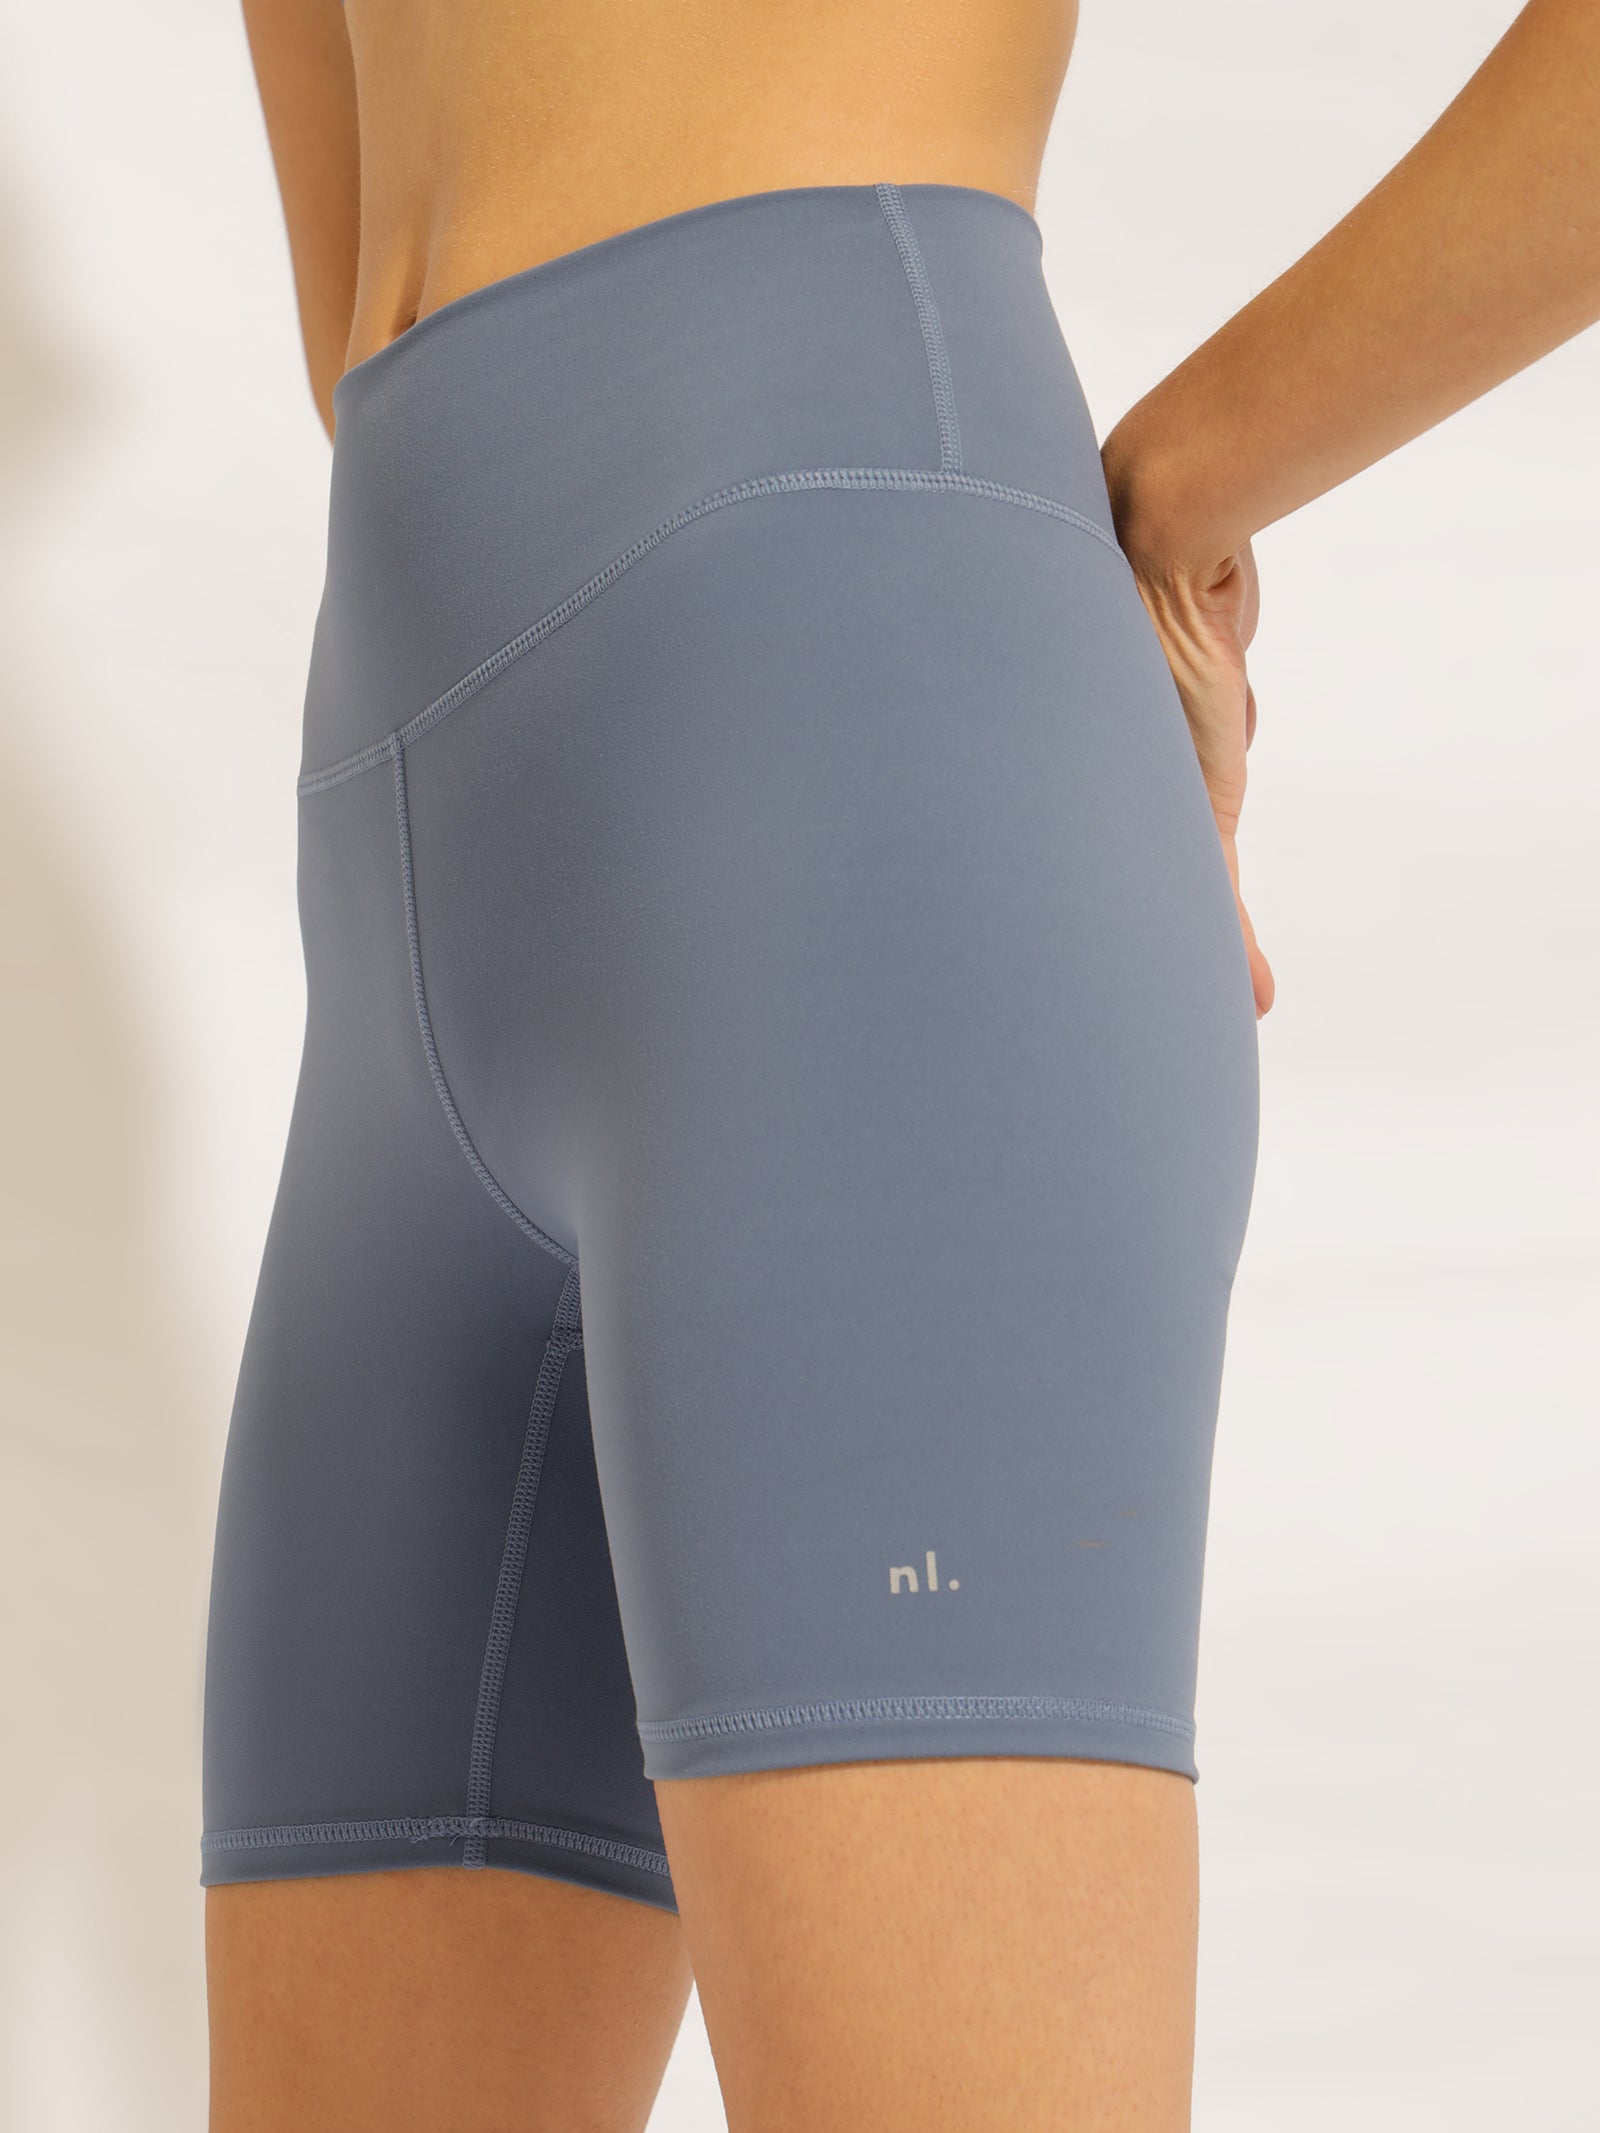 Nude Active High-Rise Bike Shorts in Bluebottle